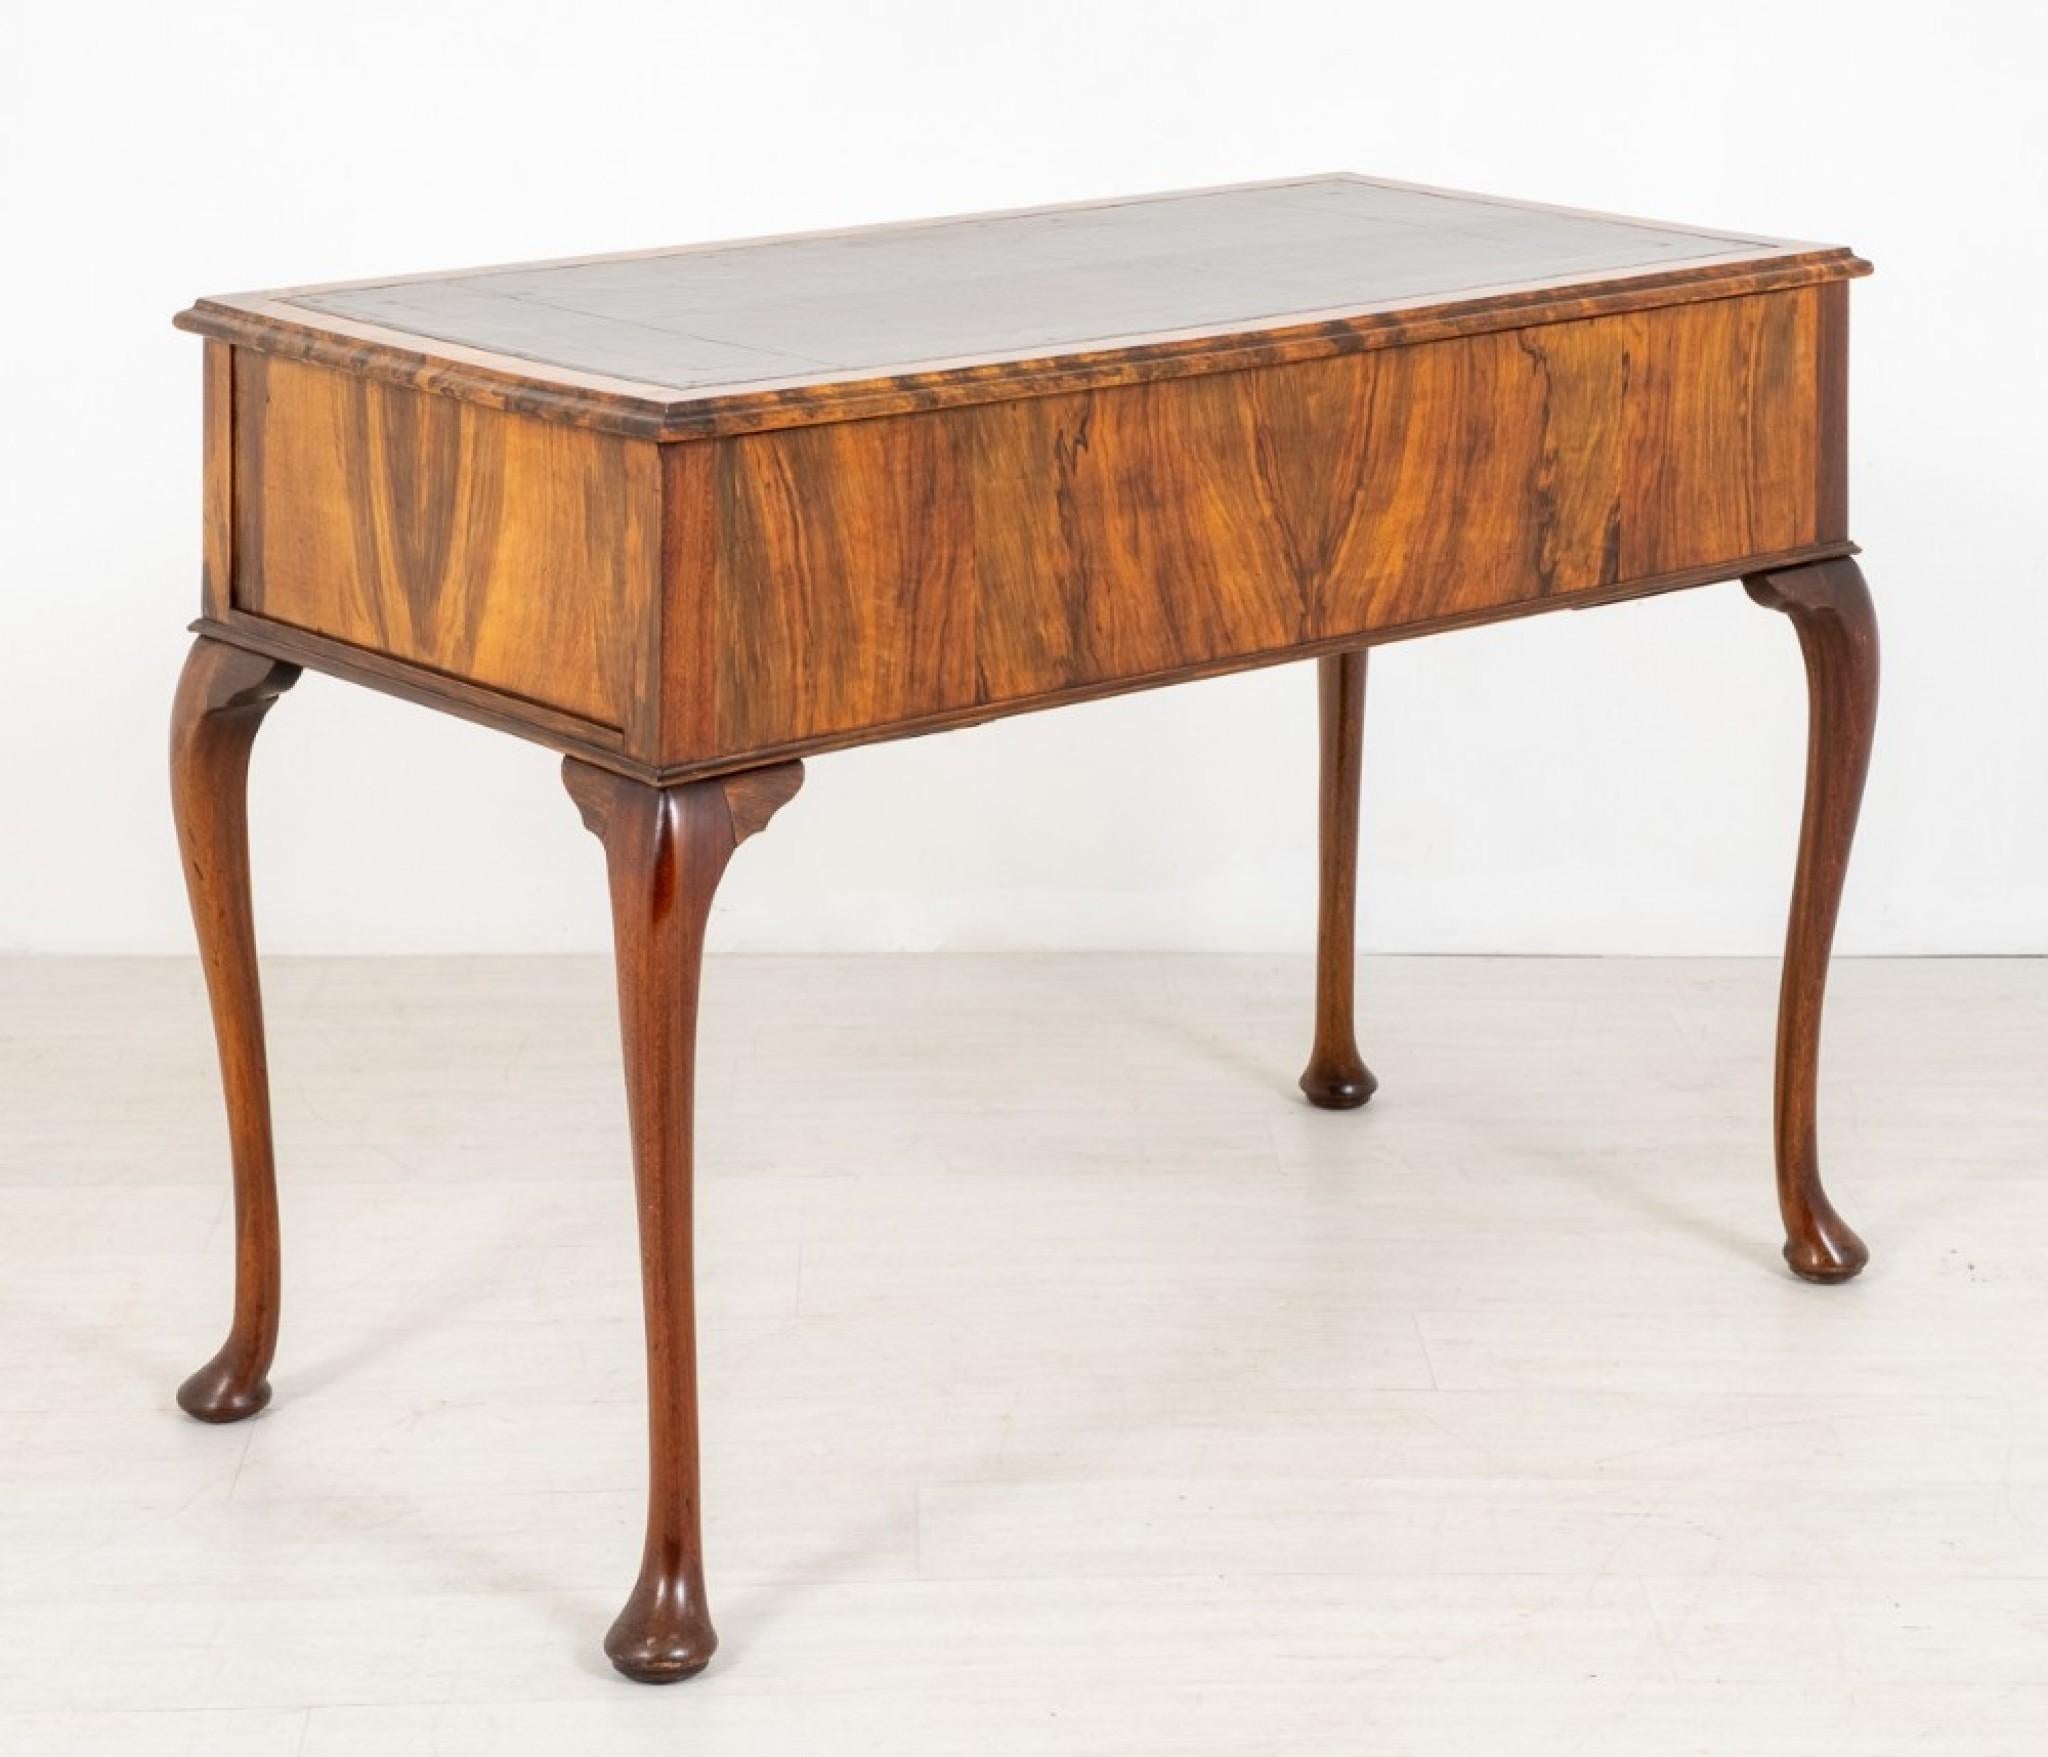 Early 20th Century Queen Anne Desk Writing Table